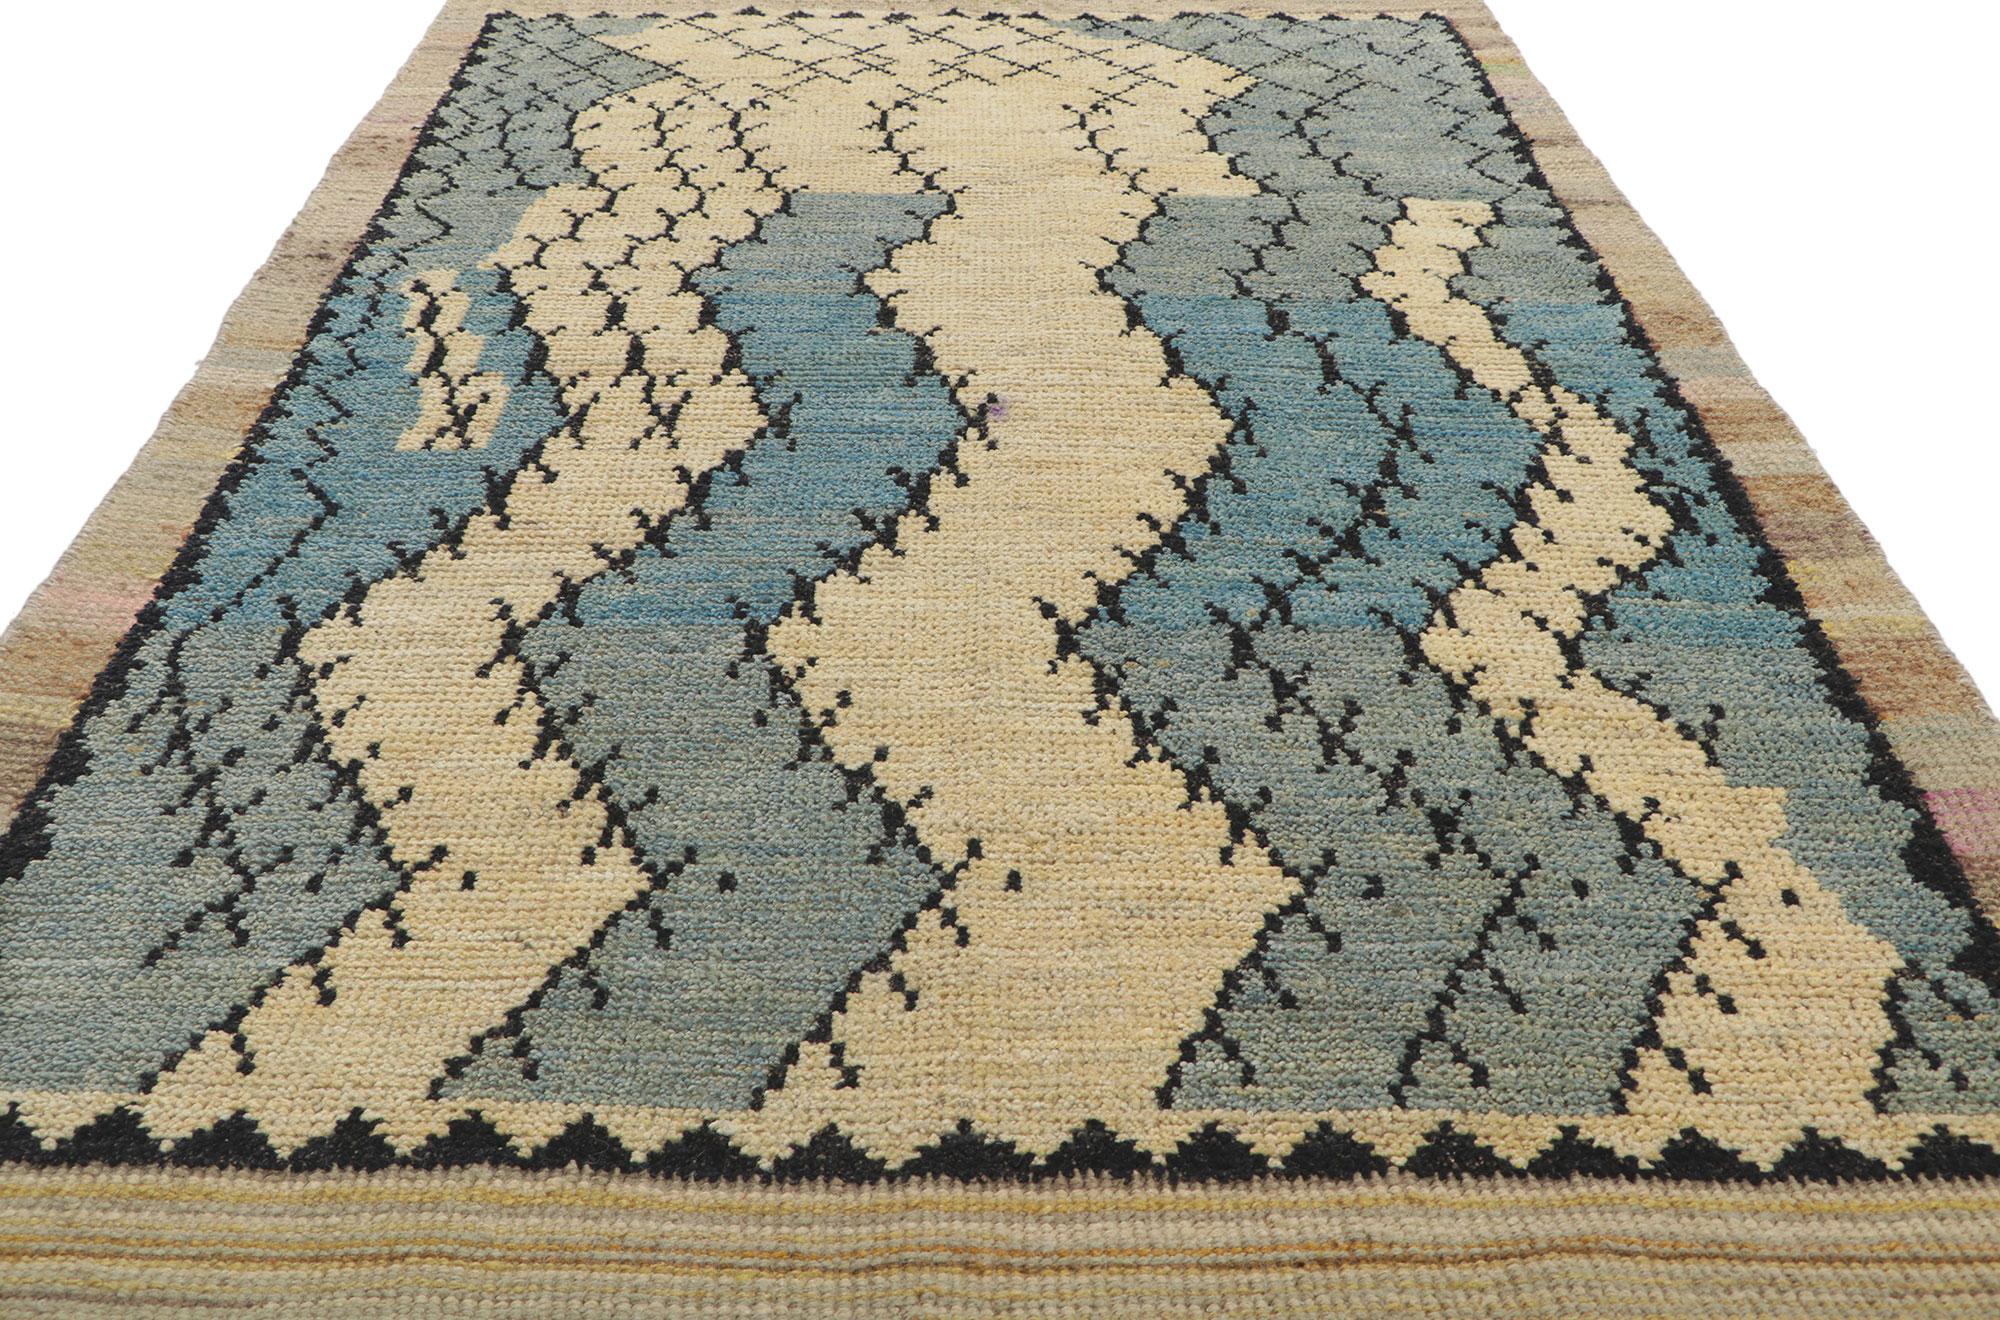 Pakistani New Contemporary Moroccan Textured Rug For Sale